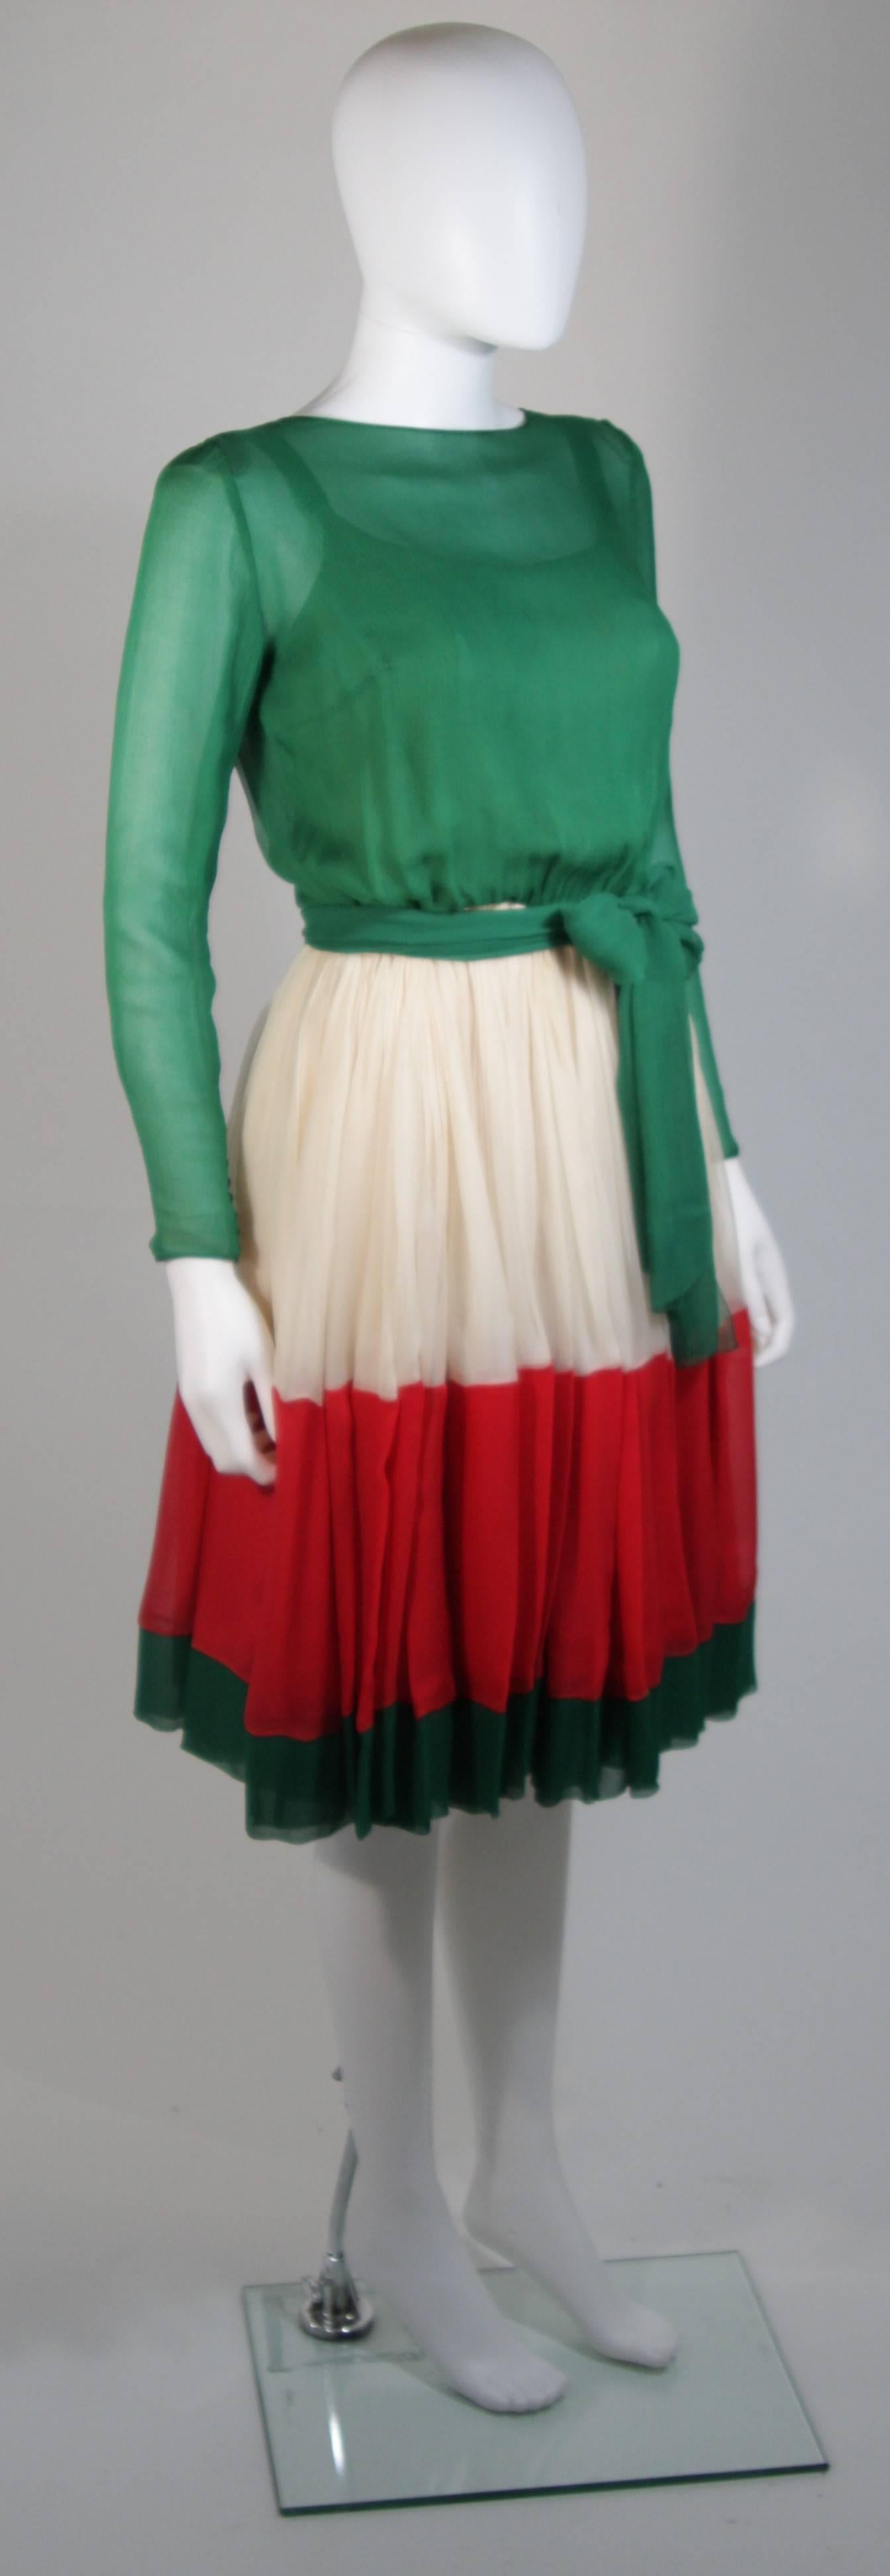 Black Galanos Attributed Silk Chiffon Green Red Cream Cocktail Dress Size Small Medium For Sale